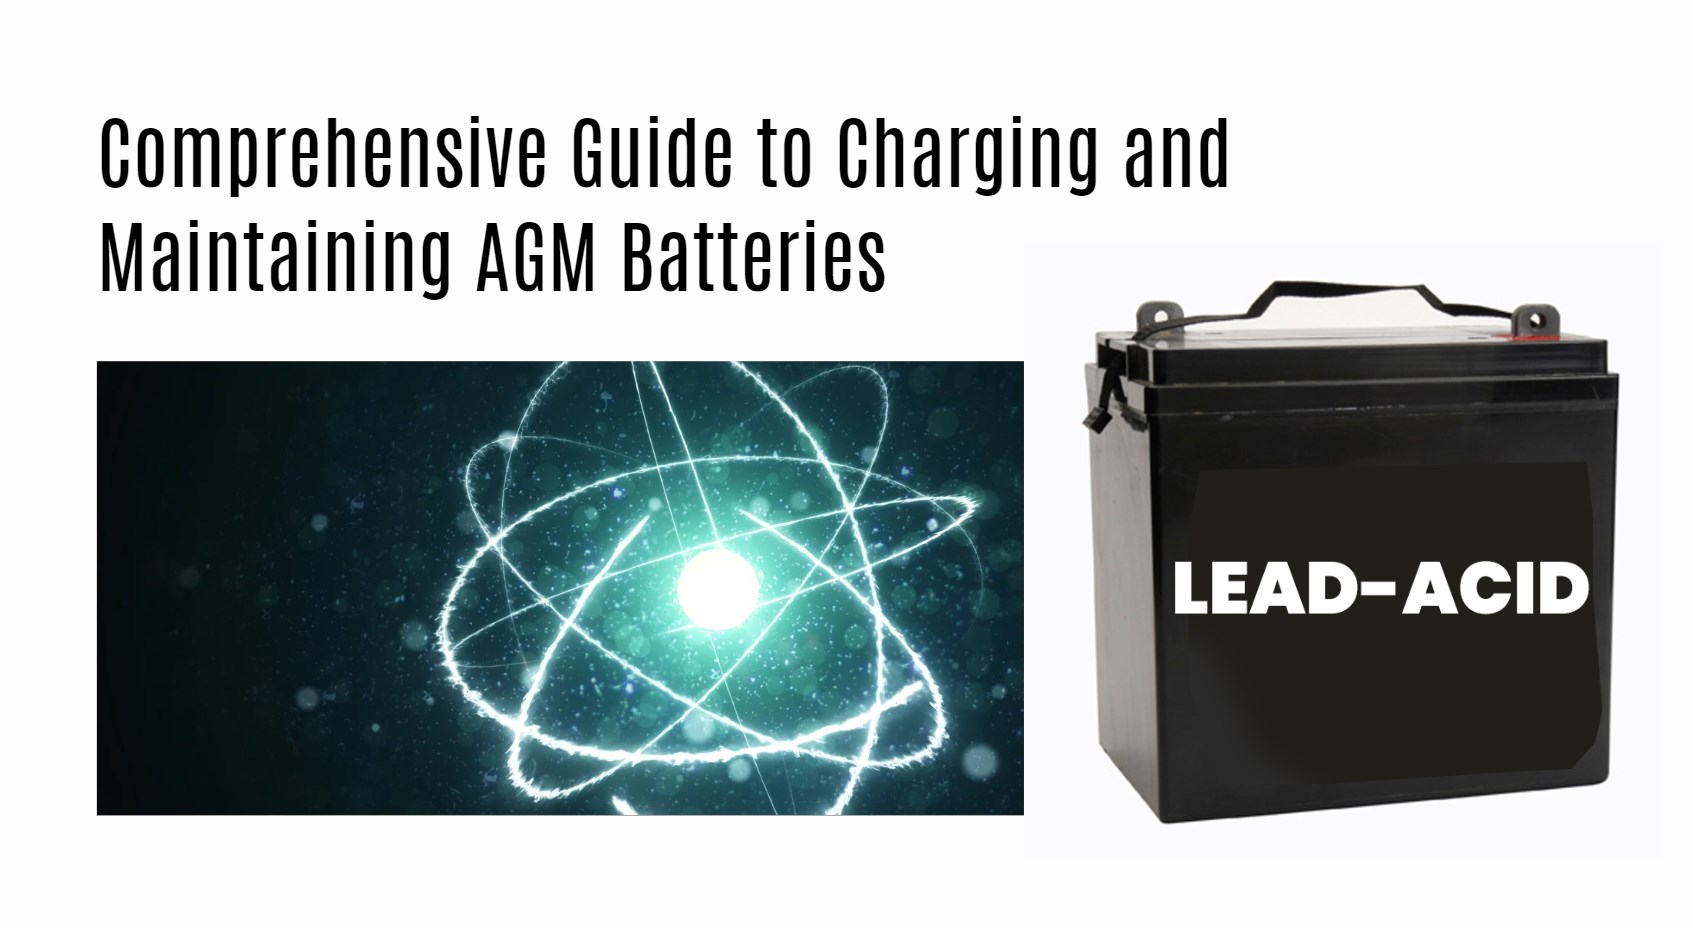 Comprehensive Guide to Charging and Maintaining AGM Batteries